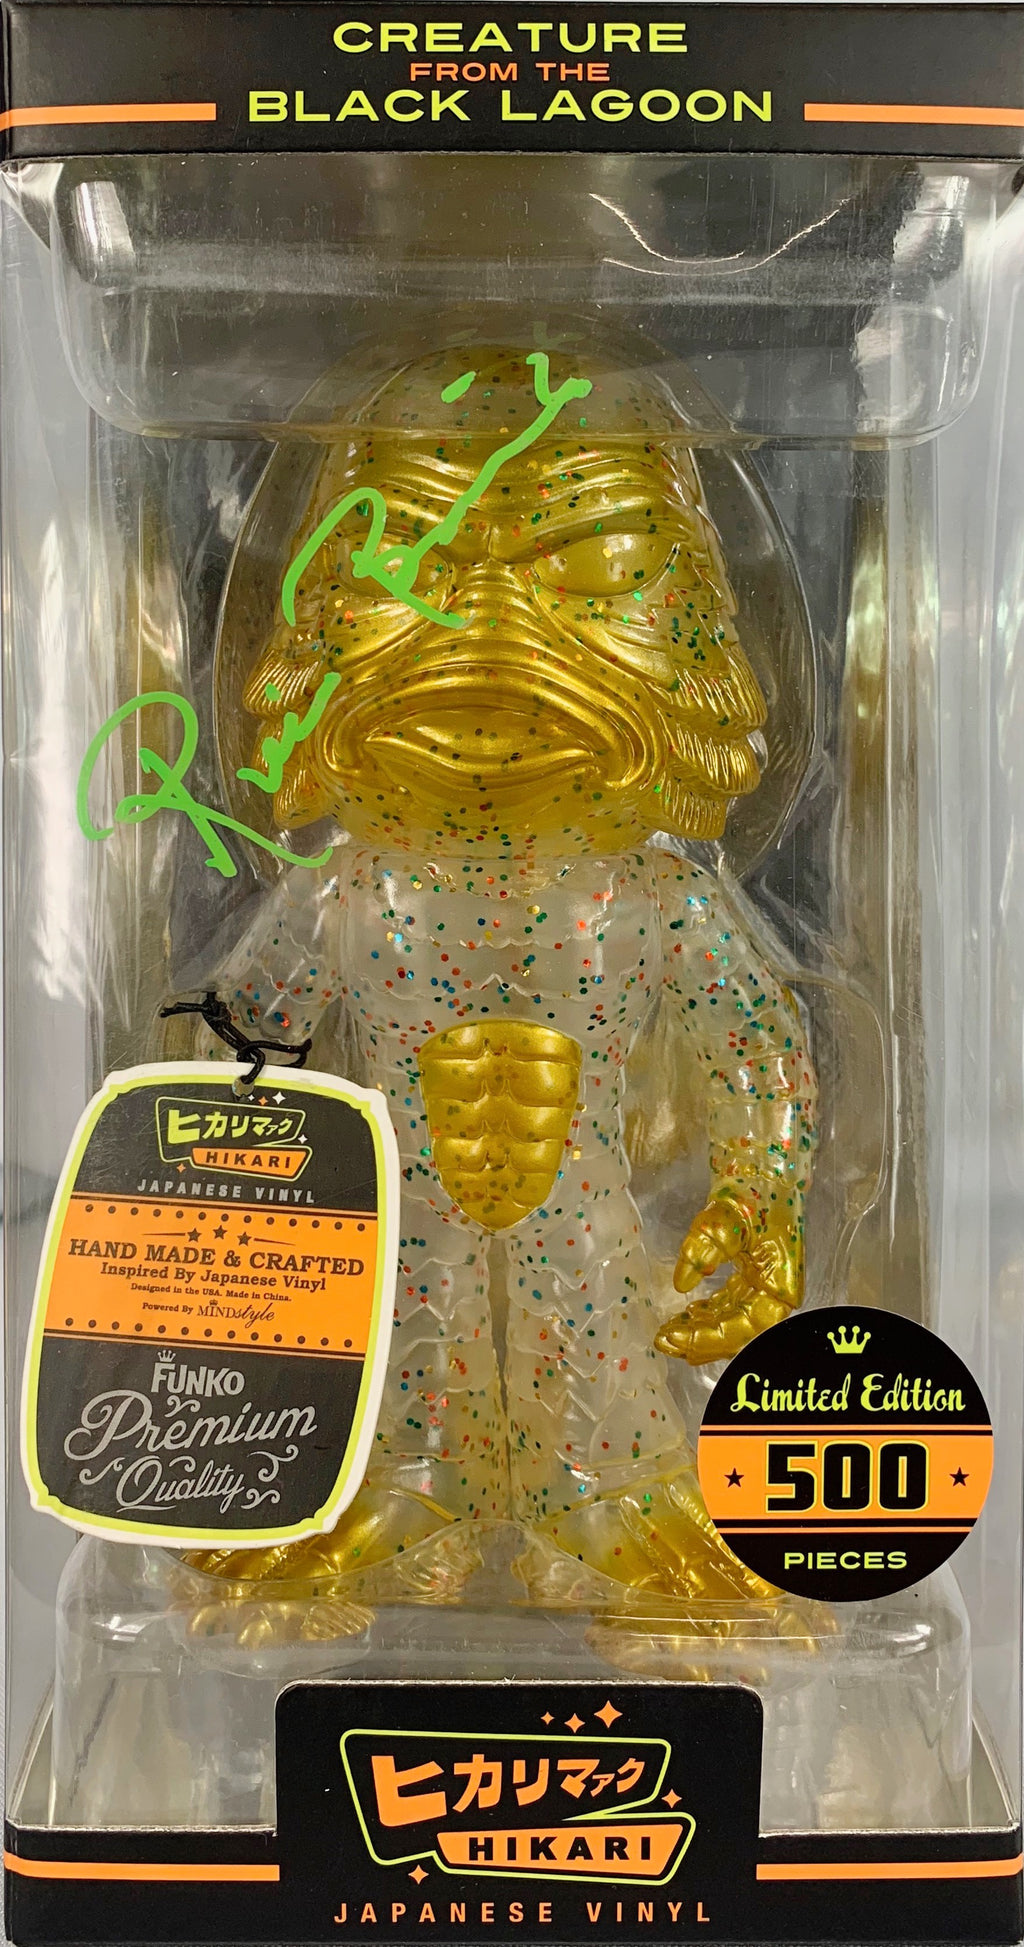 Ricou Browning signed limited Japanese Vinyl Creature from the Black Lagoon JSA